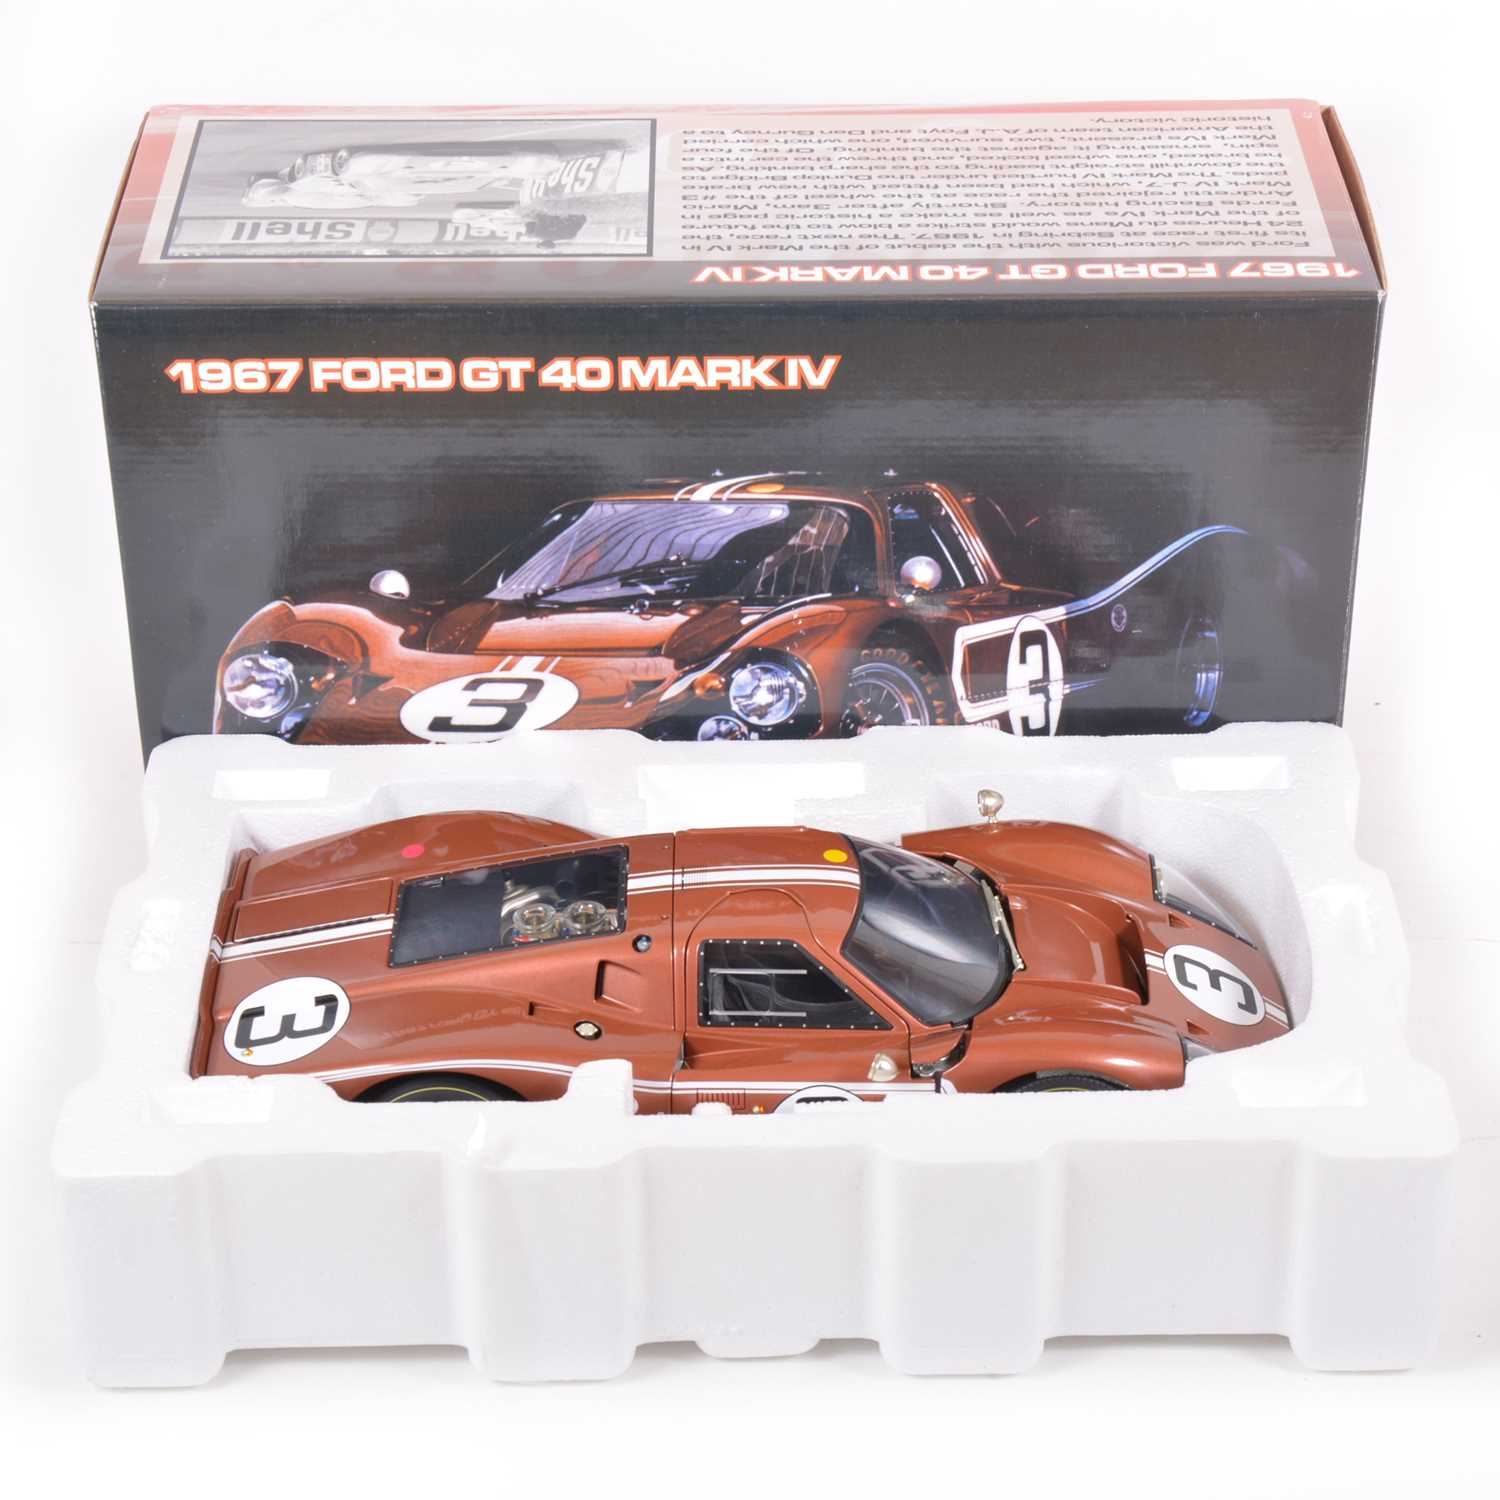 Lot 137 - GMP Real Art Replicas 1:12 scale model; Ford GT40 Mk IV (1967)